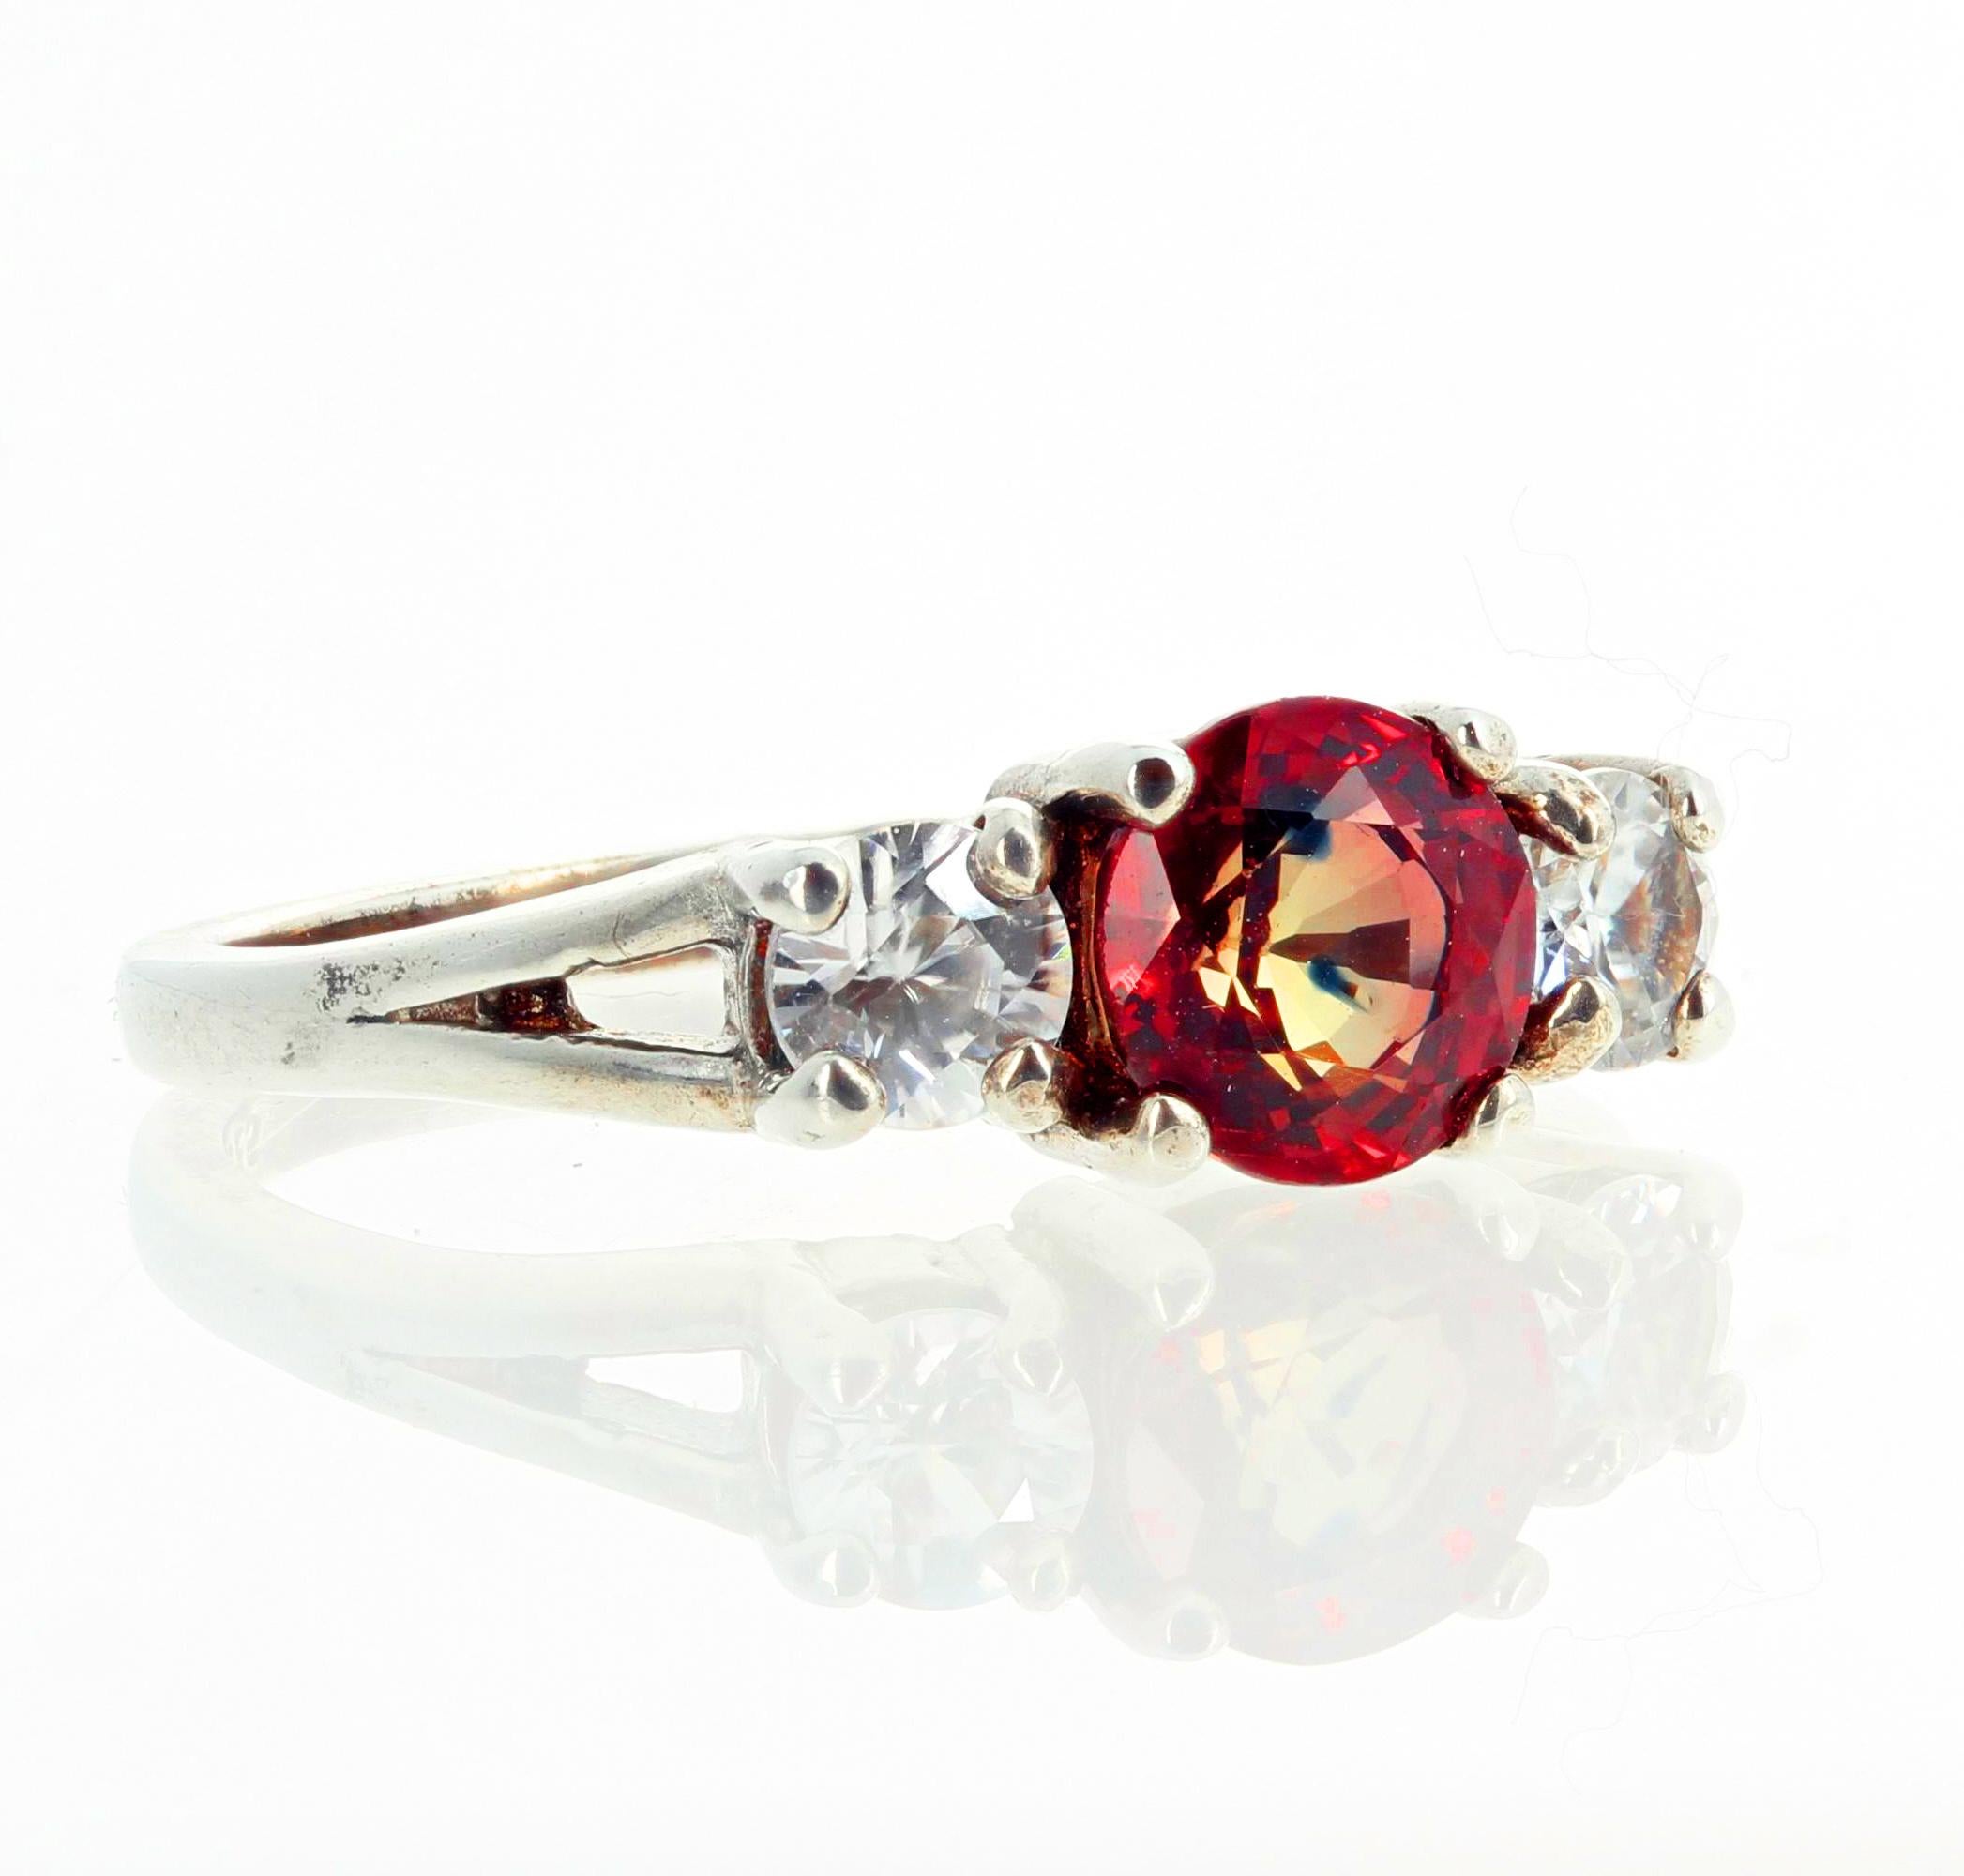 Mixed Cut AJD Rare Fiery Songea Sapphire and White Sapphire Sterling Silver Ring